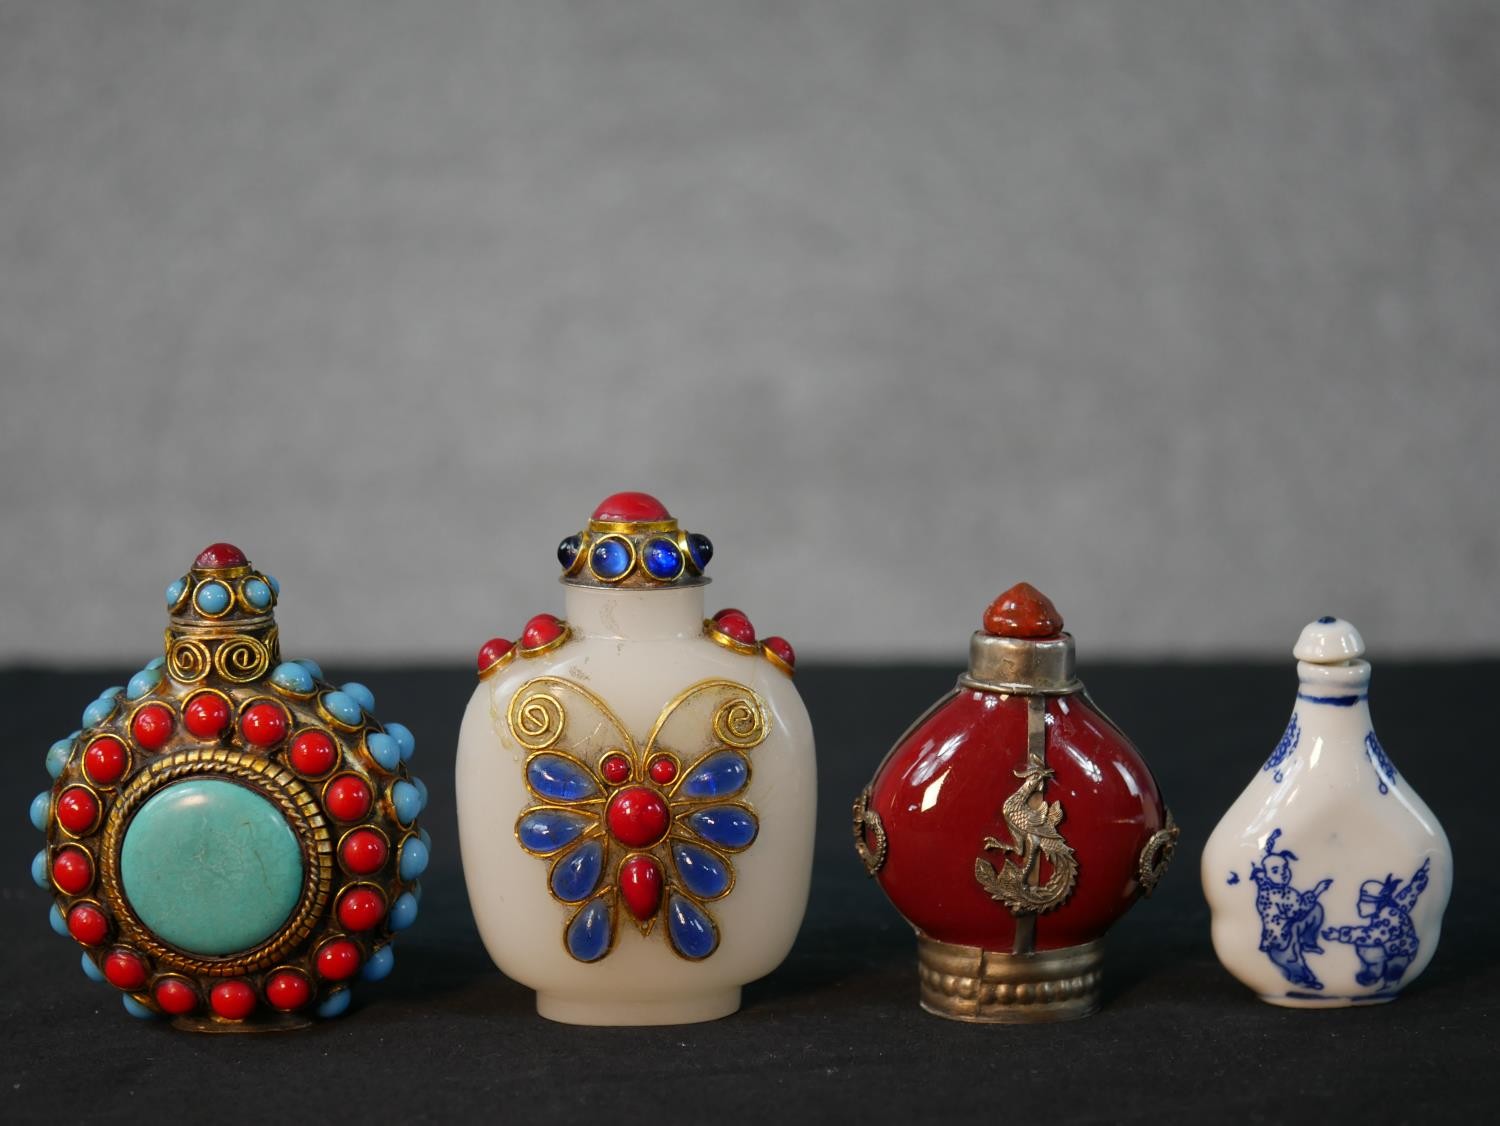 Four 20th century Chinese snuff bottles, one white porcelain with blue figural printed design, a